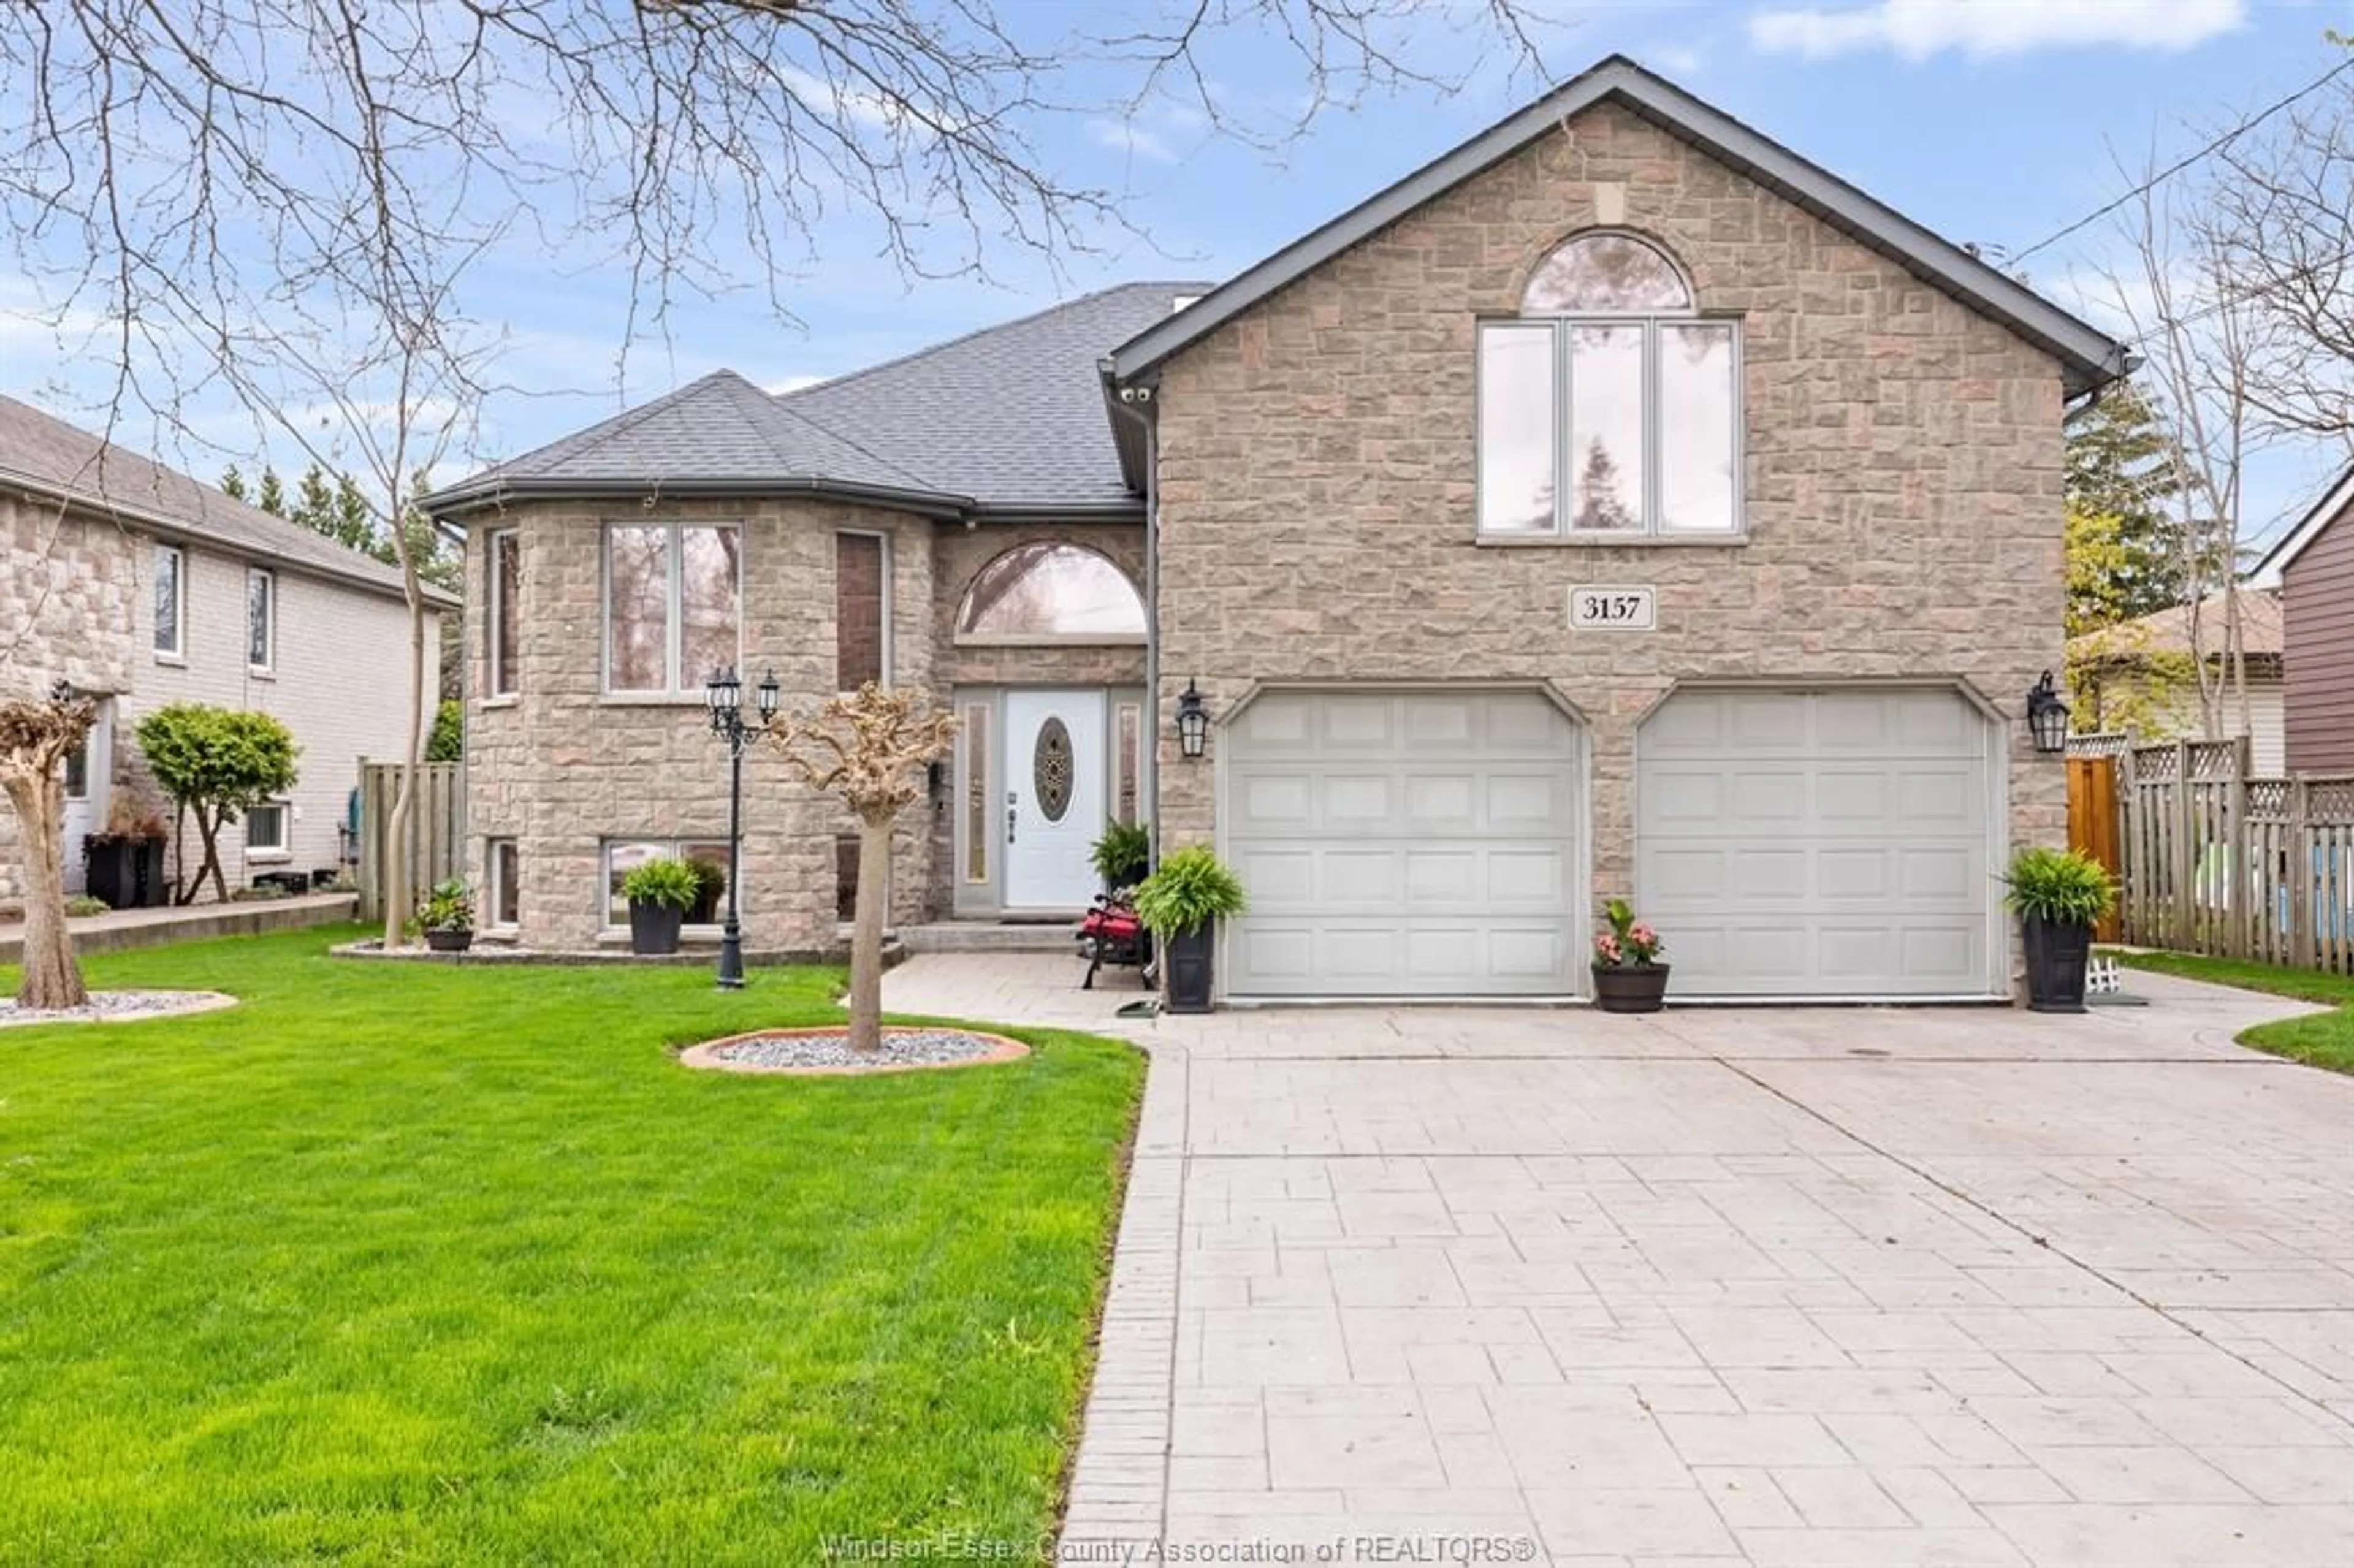 Home with brick exterior material for 3157 ROBINET, Windsor Ontario N8R 1P7